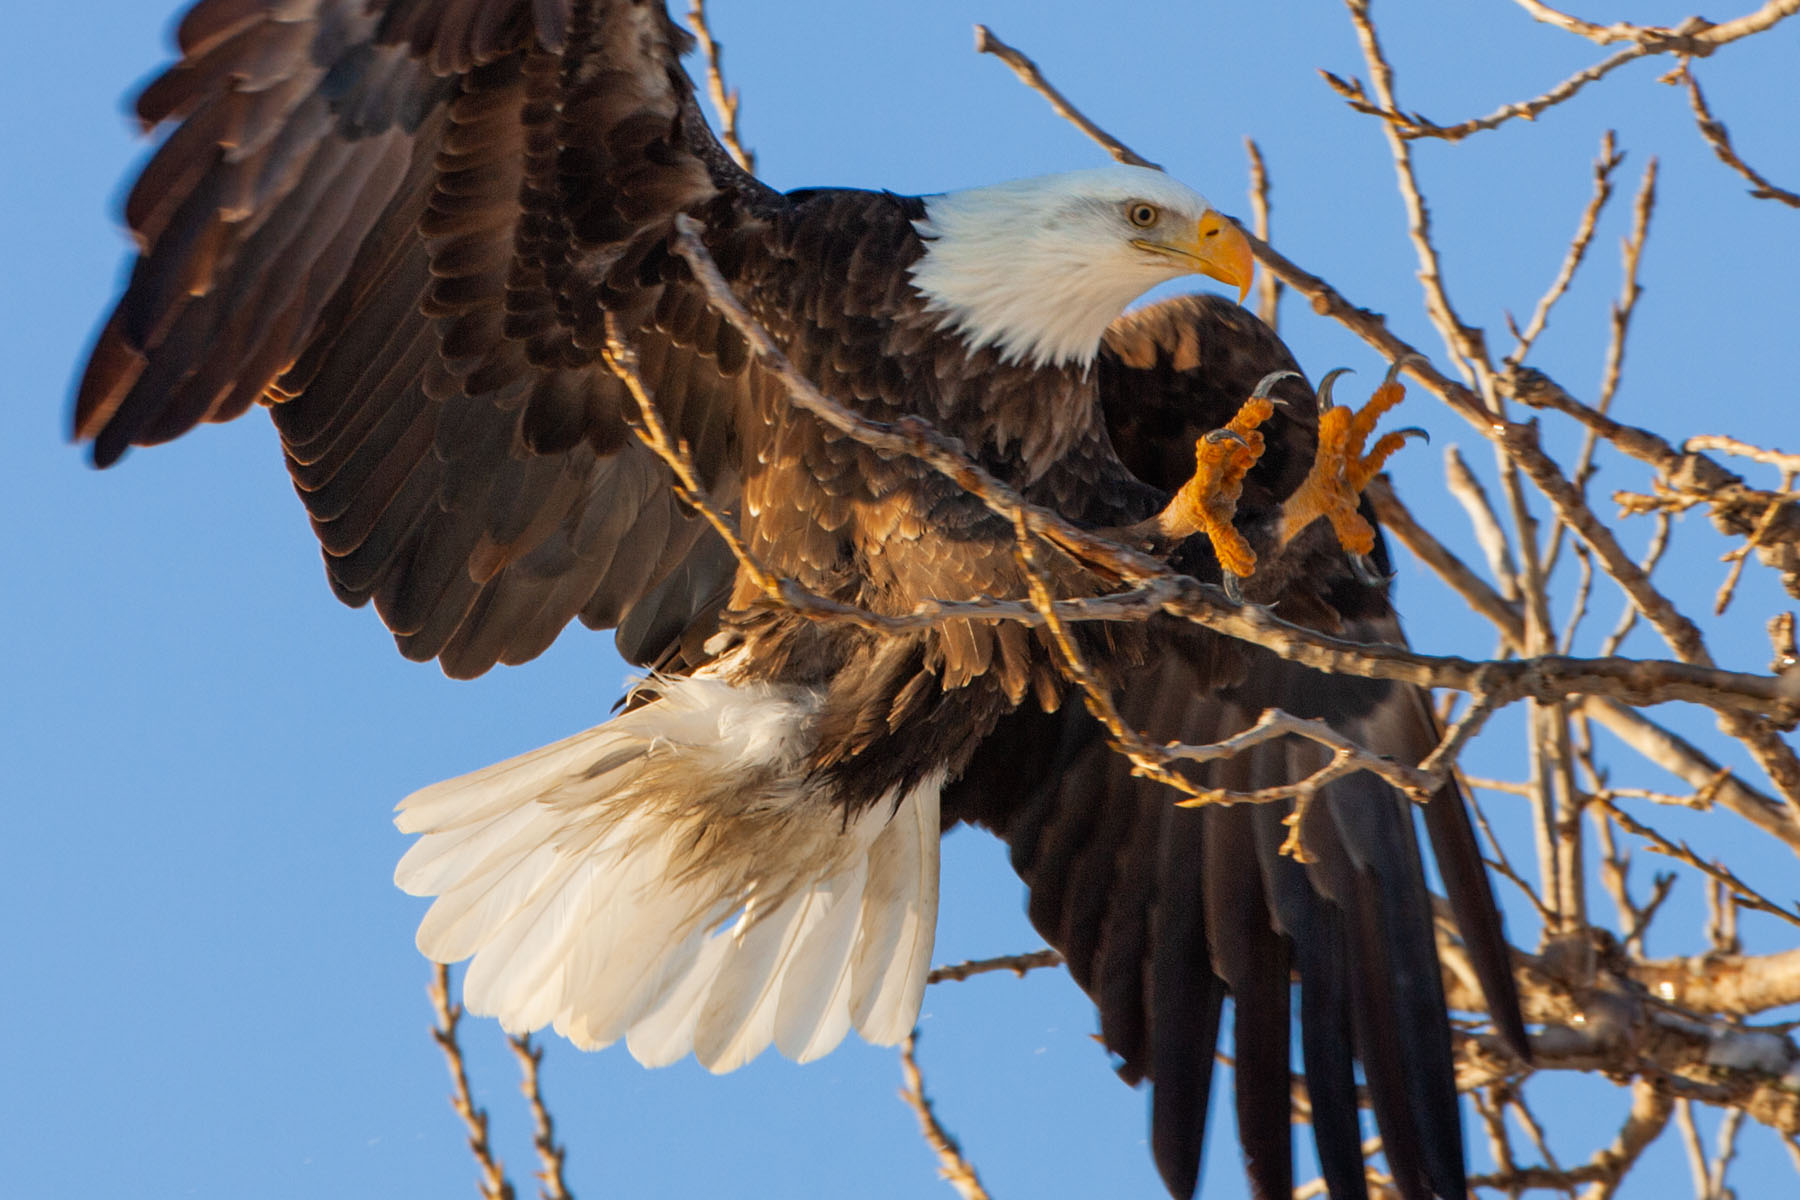 Bald eagle comes in for a landing, Keokuk, IA.  Click for next photo.